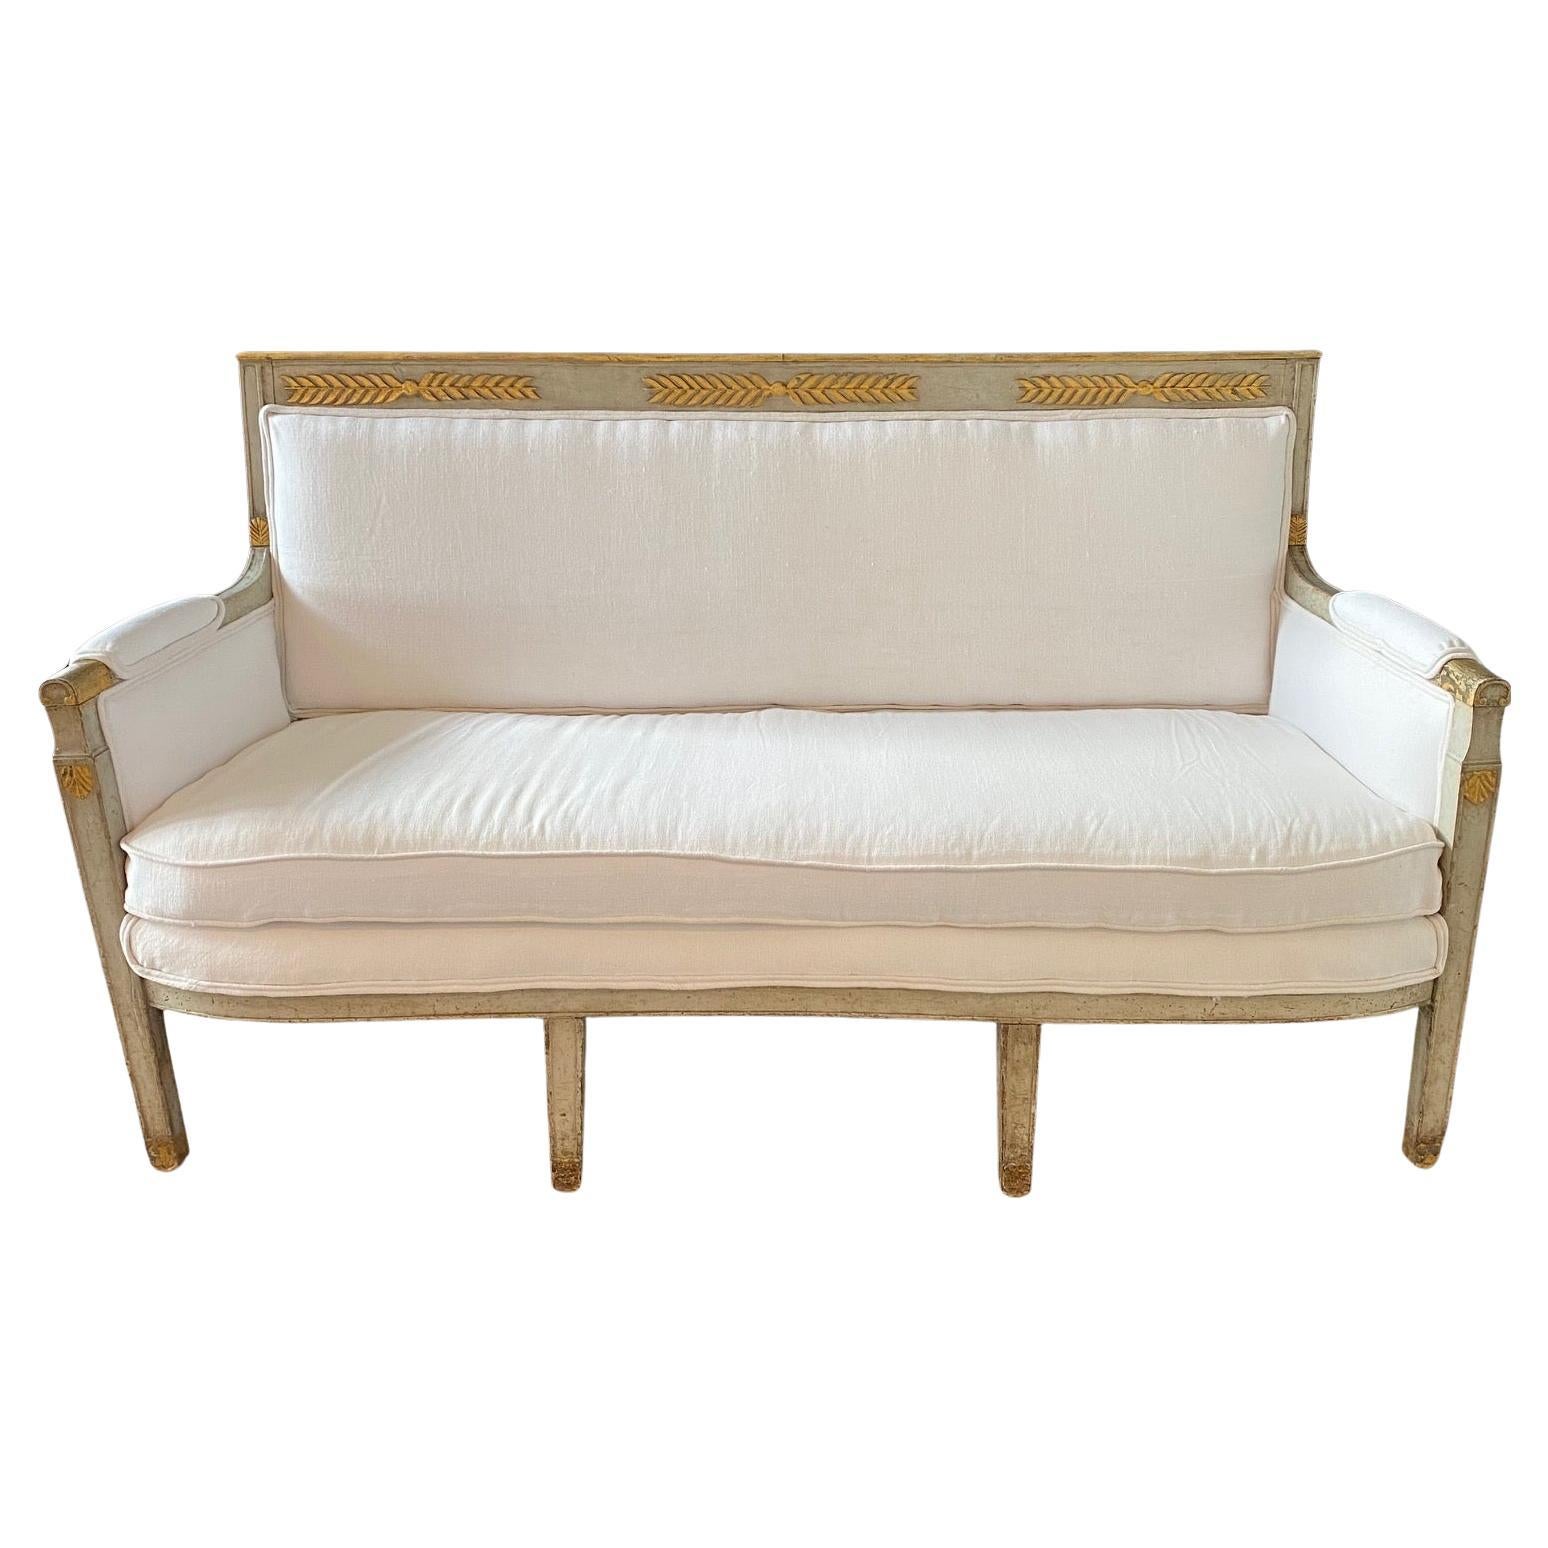 Early 19th Century Italian Neoclassical Painted and Parcel Gilt Sofa or Canape For Sale